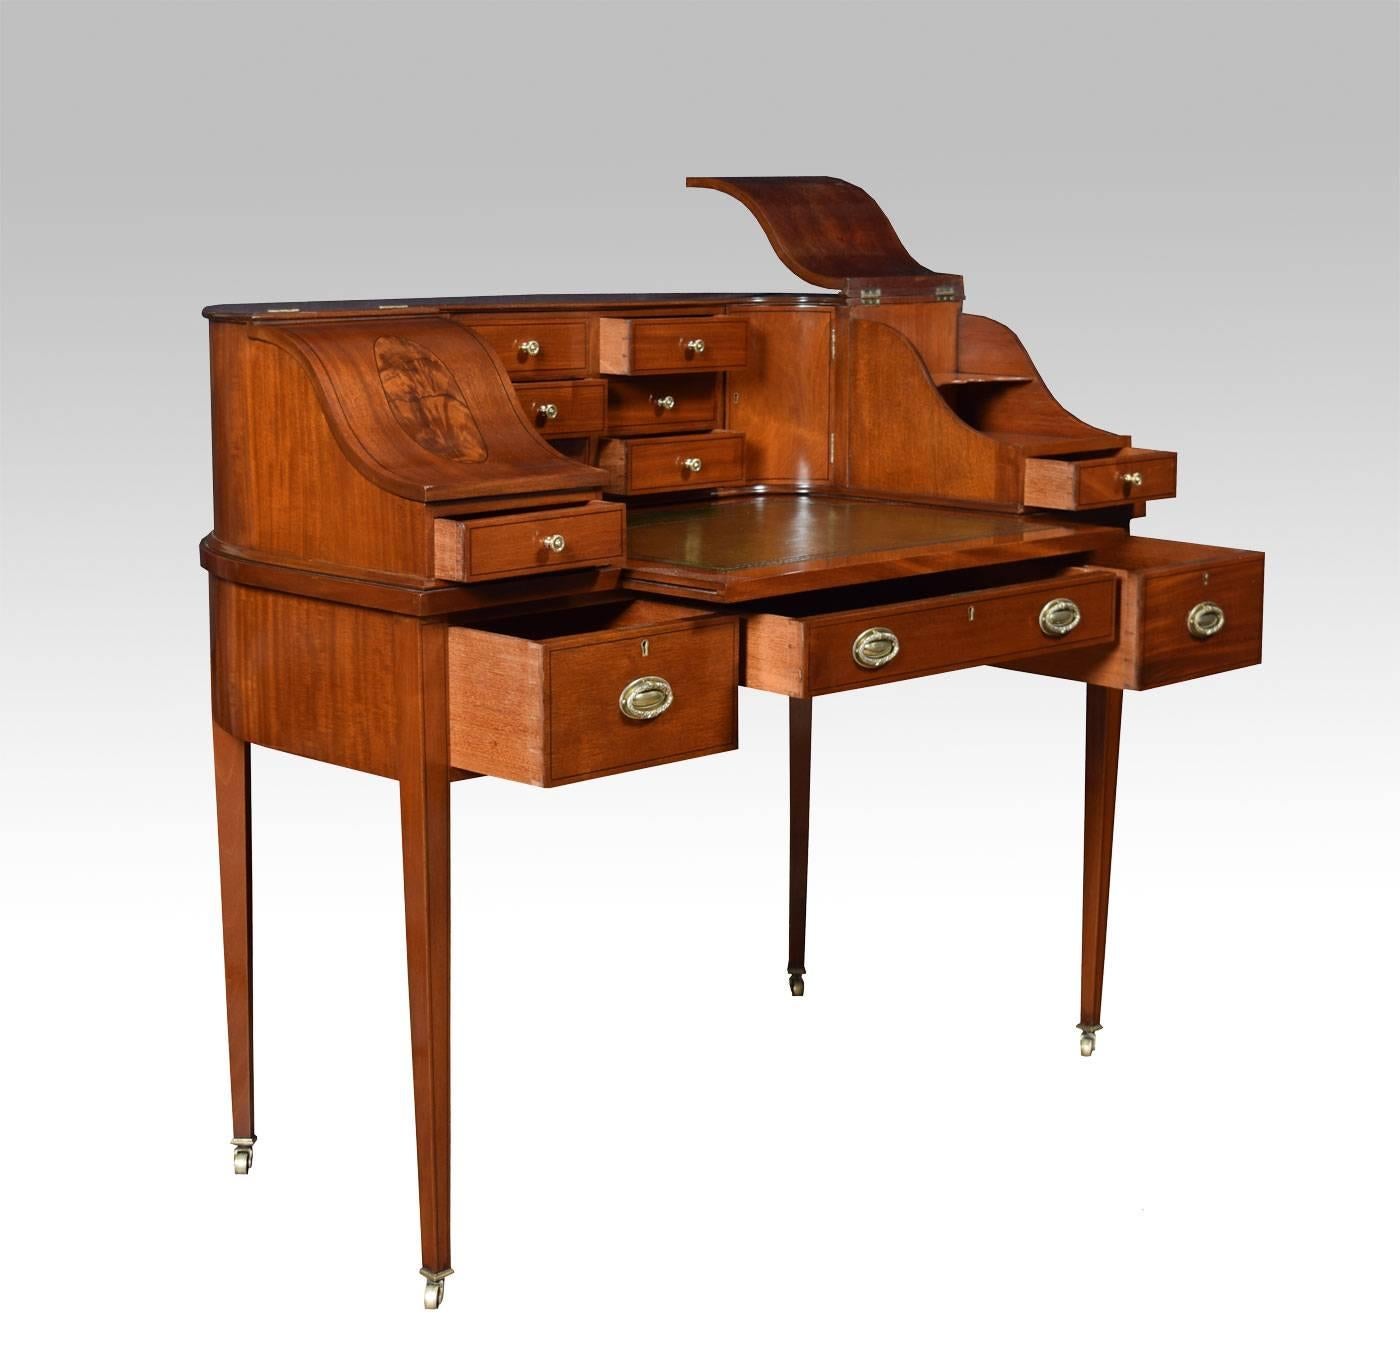 Mahogany Carlton house desk, the shaped upper structure with moulded edge above an arrangement of six small drawers, flanked by doors and down swept lidded compartments over a tooled and gilded green leather pull out writing surface. The frieze set